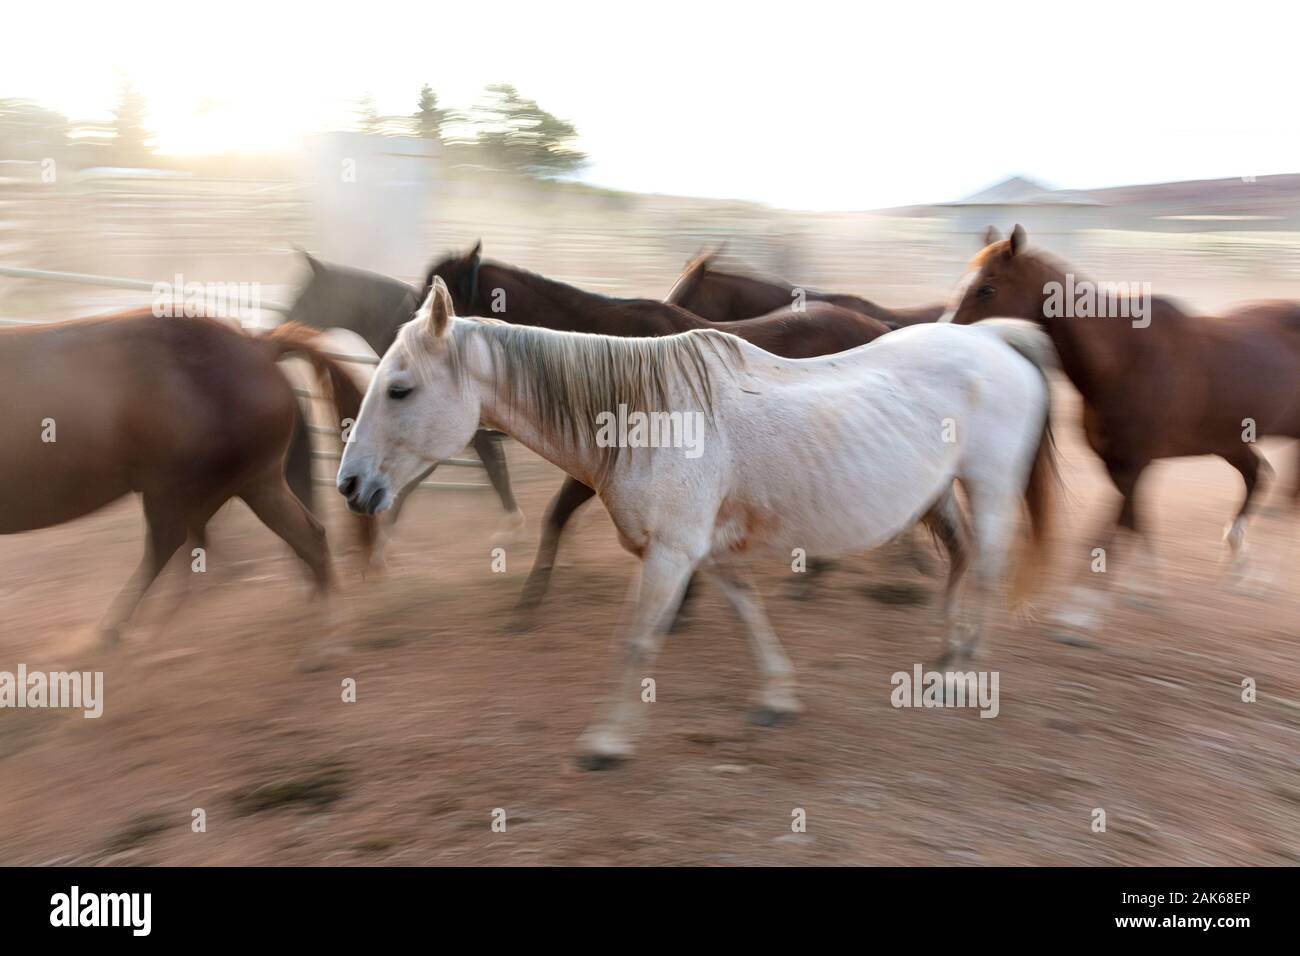 WY04120-00...WYOMING - Cavalli in Willow Creek Ranch corral. Foto Stock